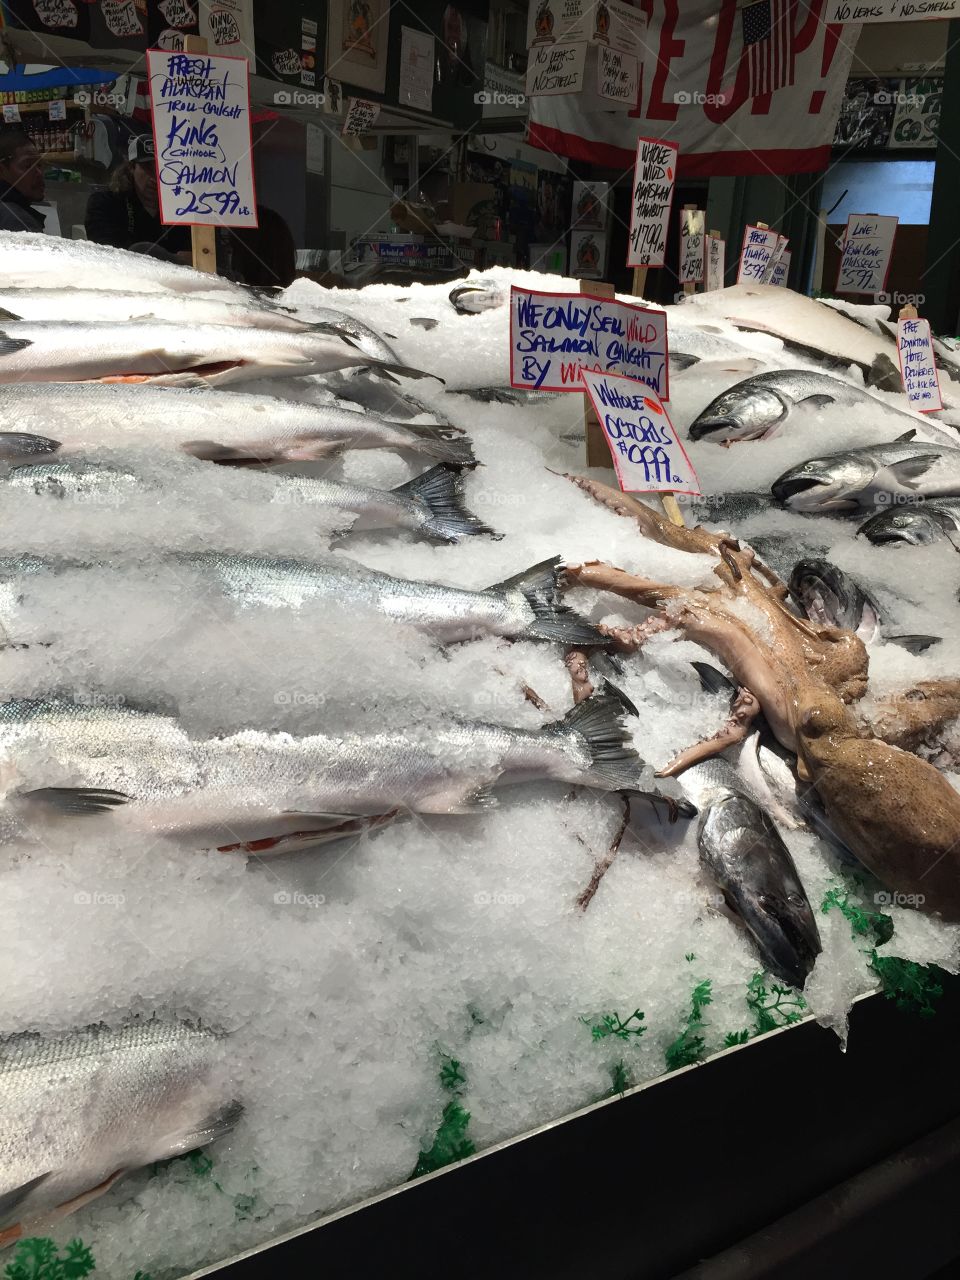 Seattle fish market, fishes, octopus, ice, pike place, market place, store, grocery store, Stand, seafood, live fish 